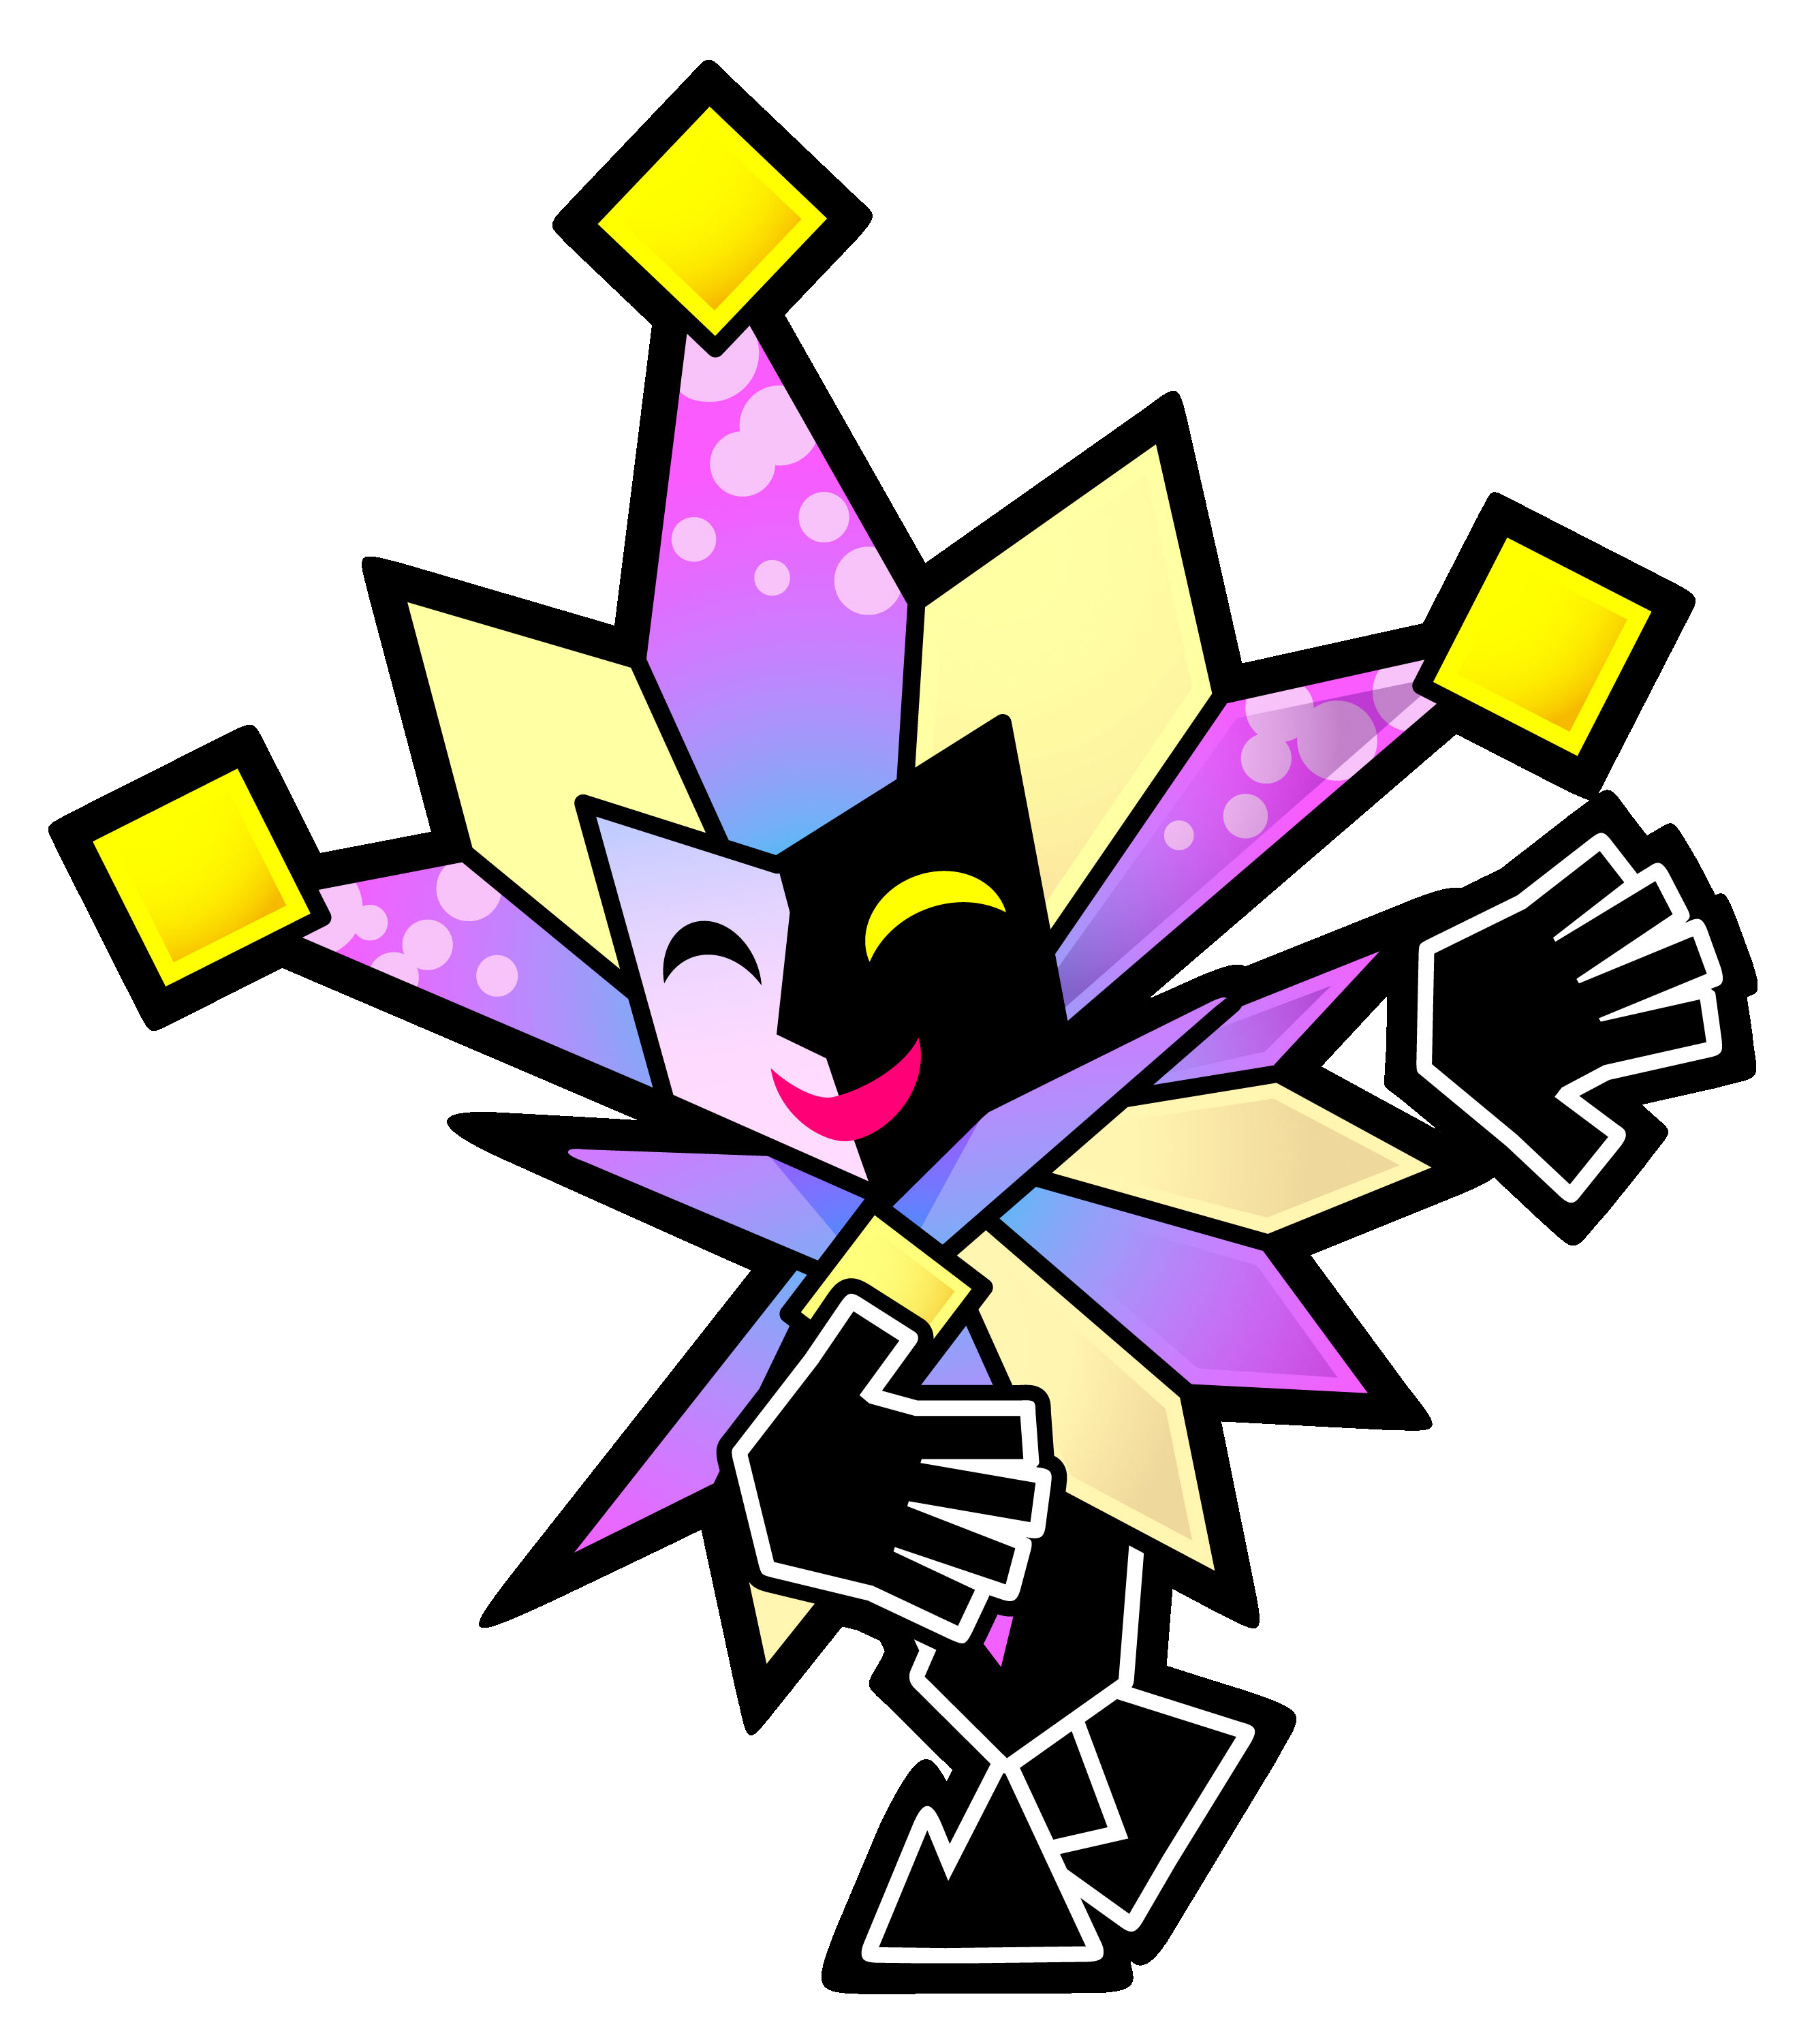 Dimentio.png